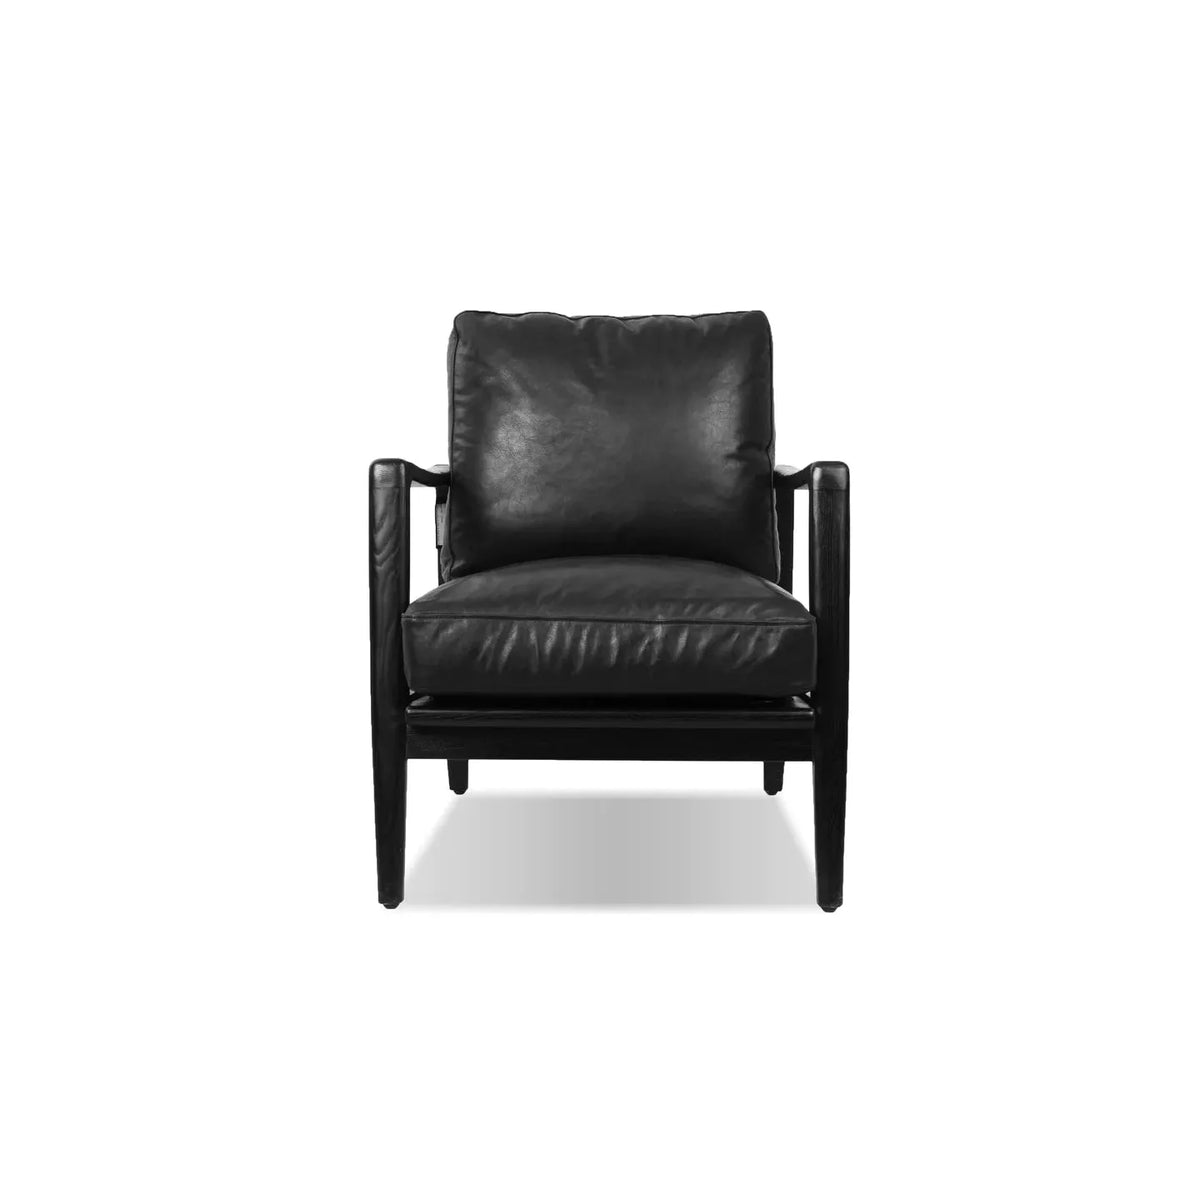 Craftman Leather Lounge Chair